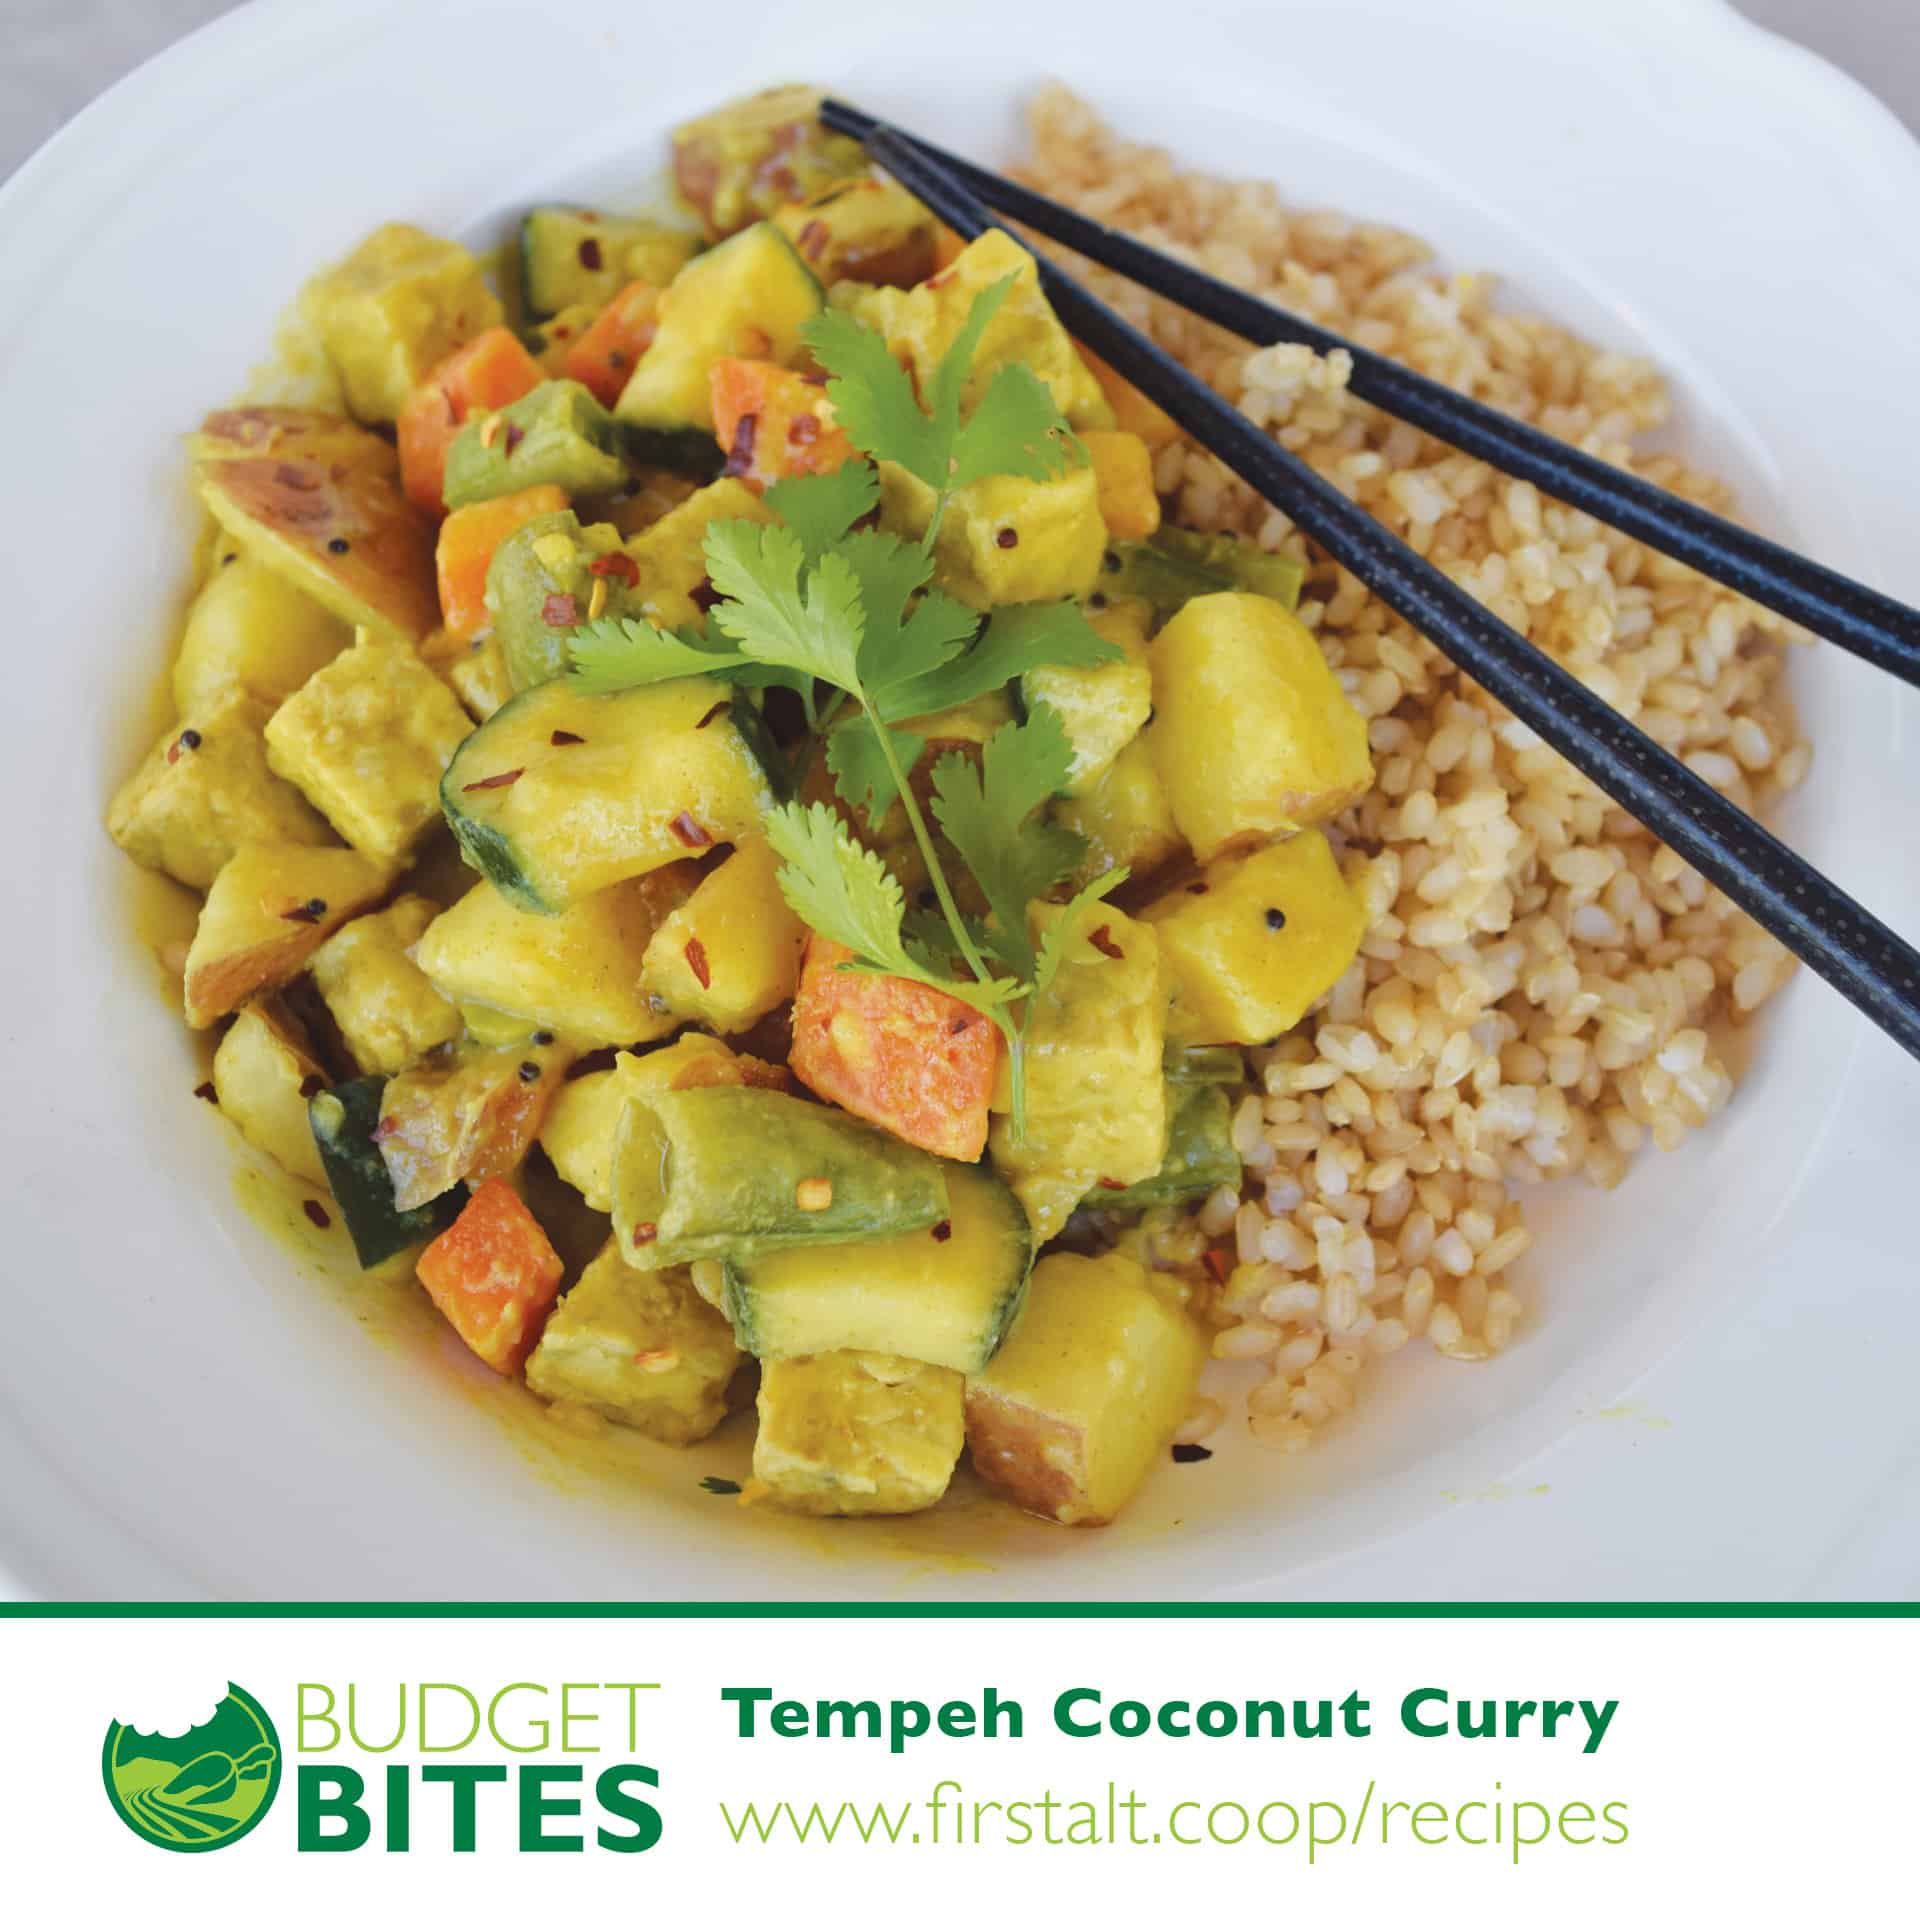 Tempeh Coconut Curry